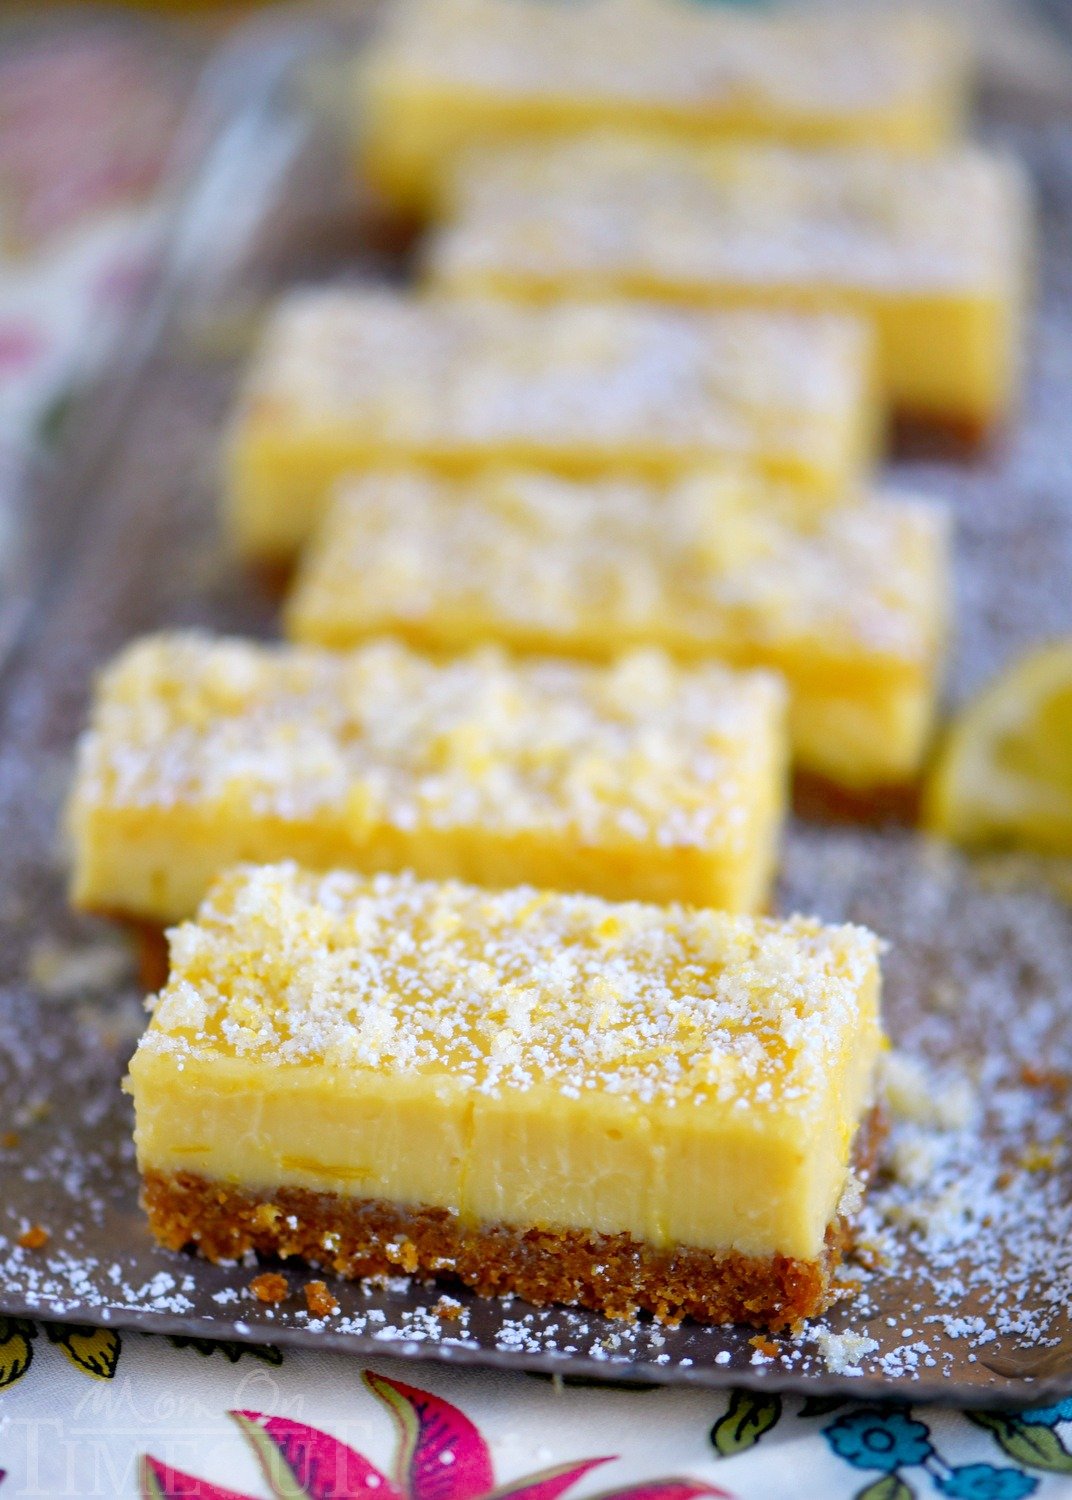 These Lemon Drop Bars are extra creamy and topped with candied lemon zest for the BIGGEST lemon flavor possible! So easy to make, deliciously sweet and tart, you'll find these Lemon Drop Bars hard to resist! 